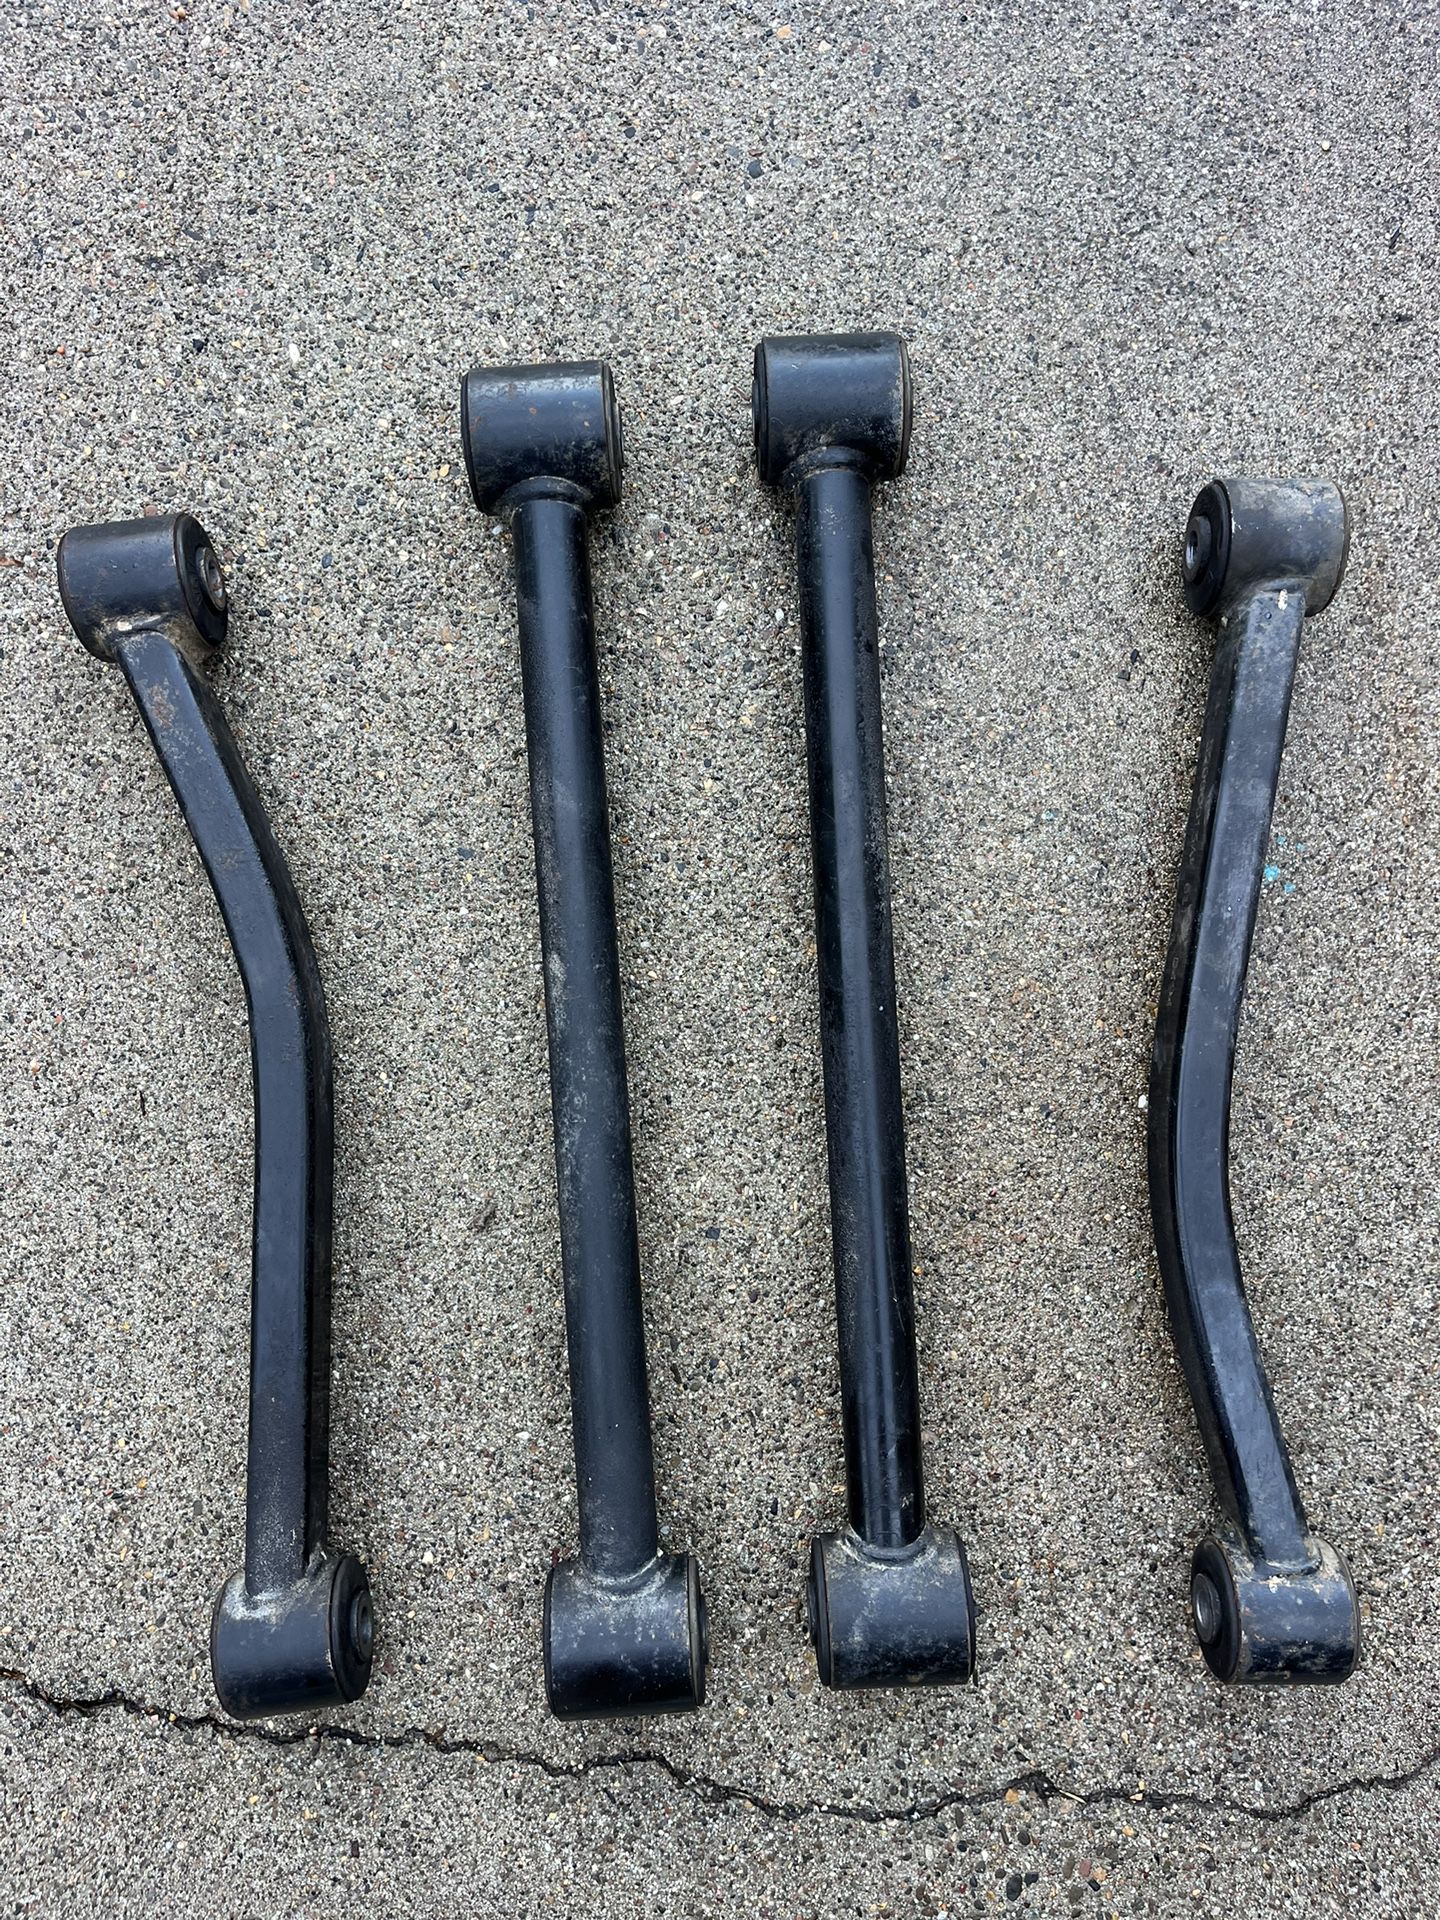 Stock Jeep JK Rear Control Arms Trail Spare Or project